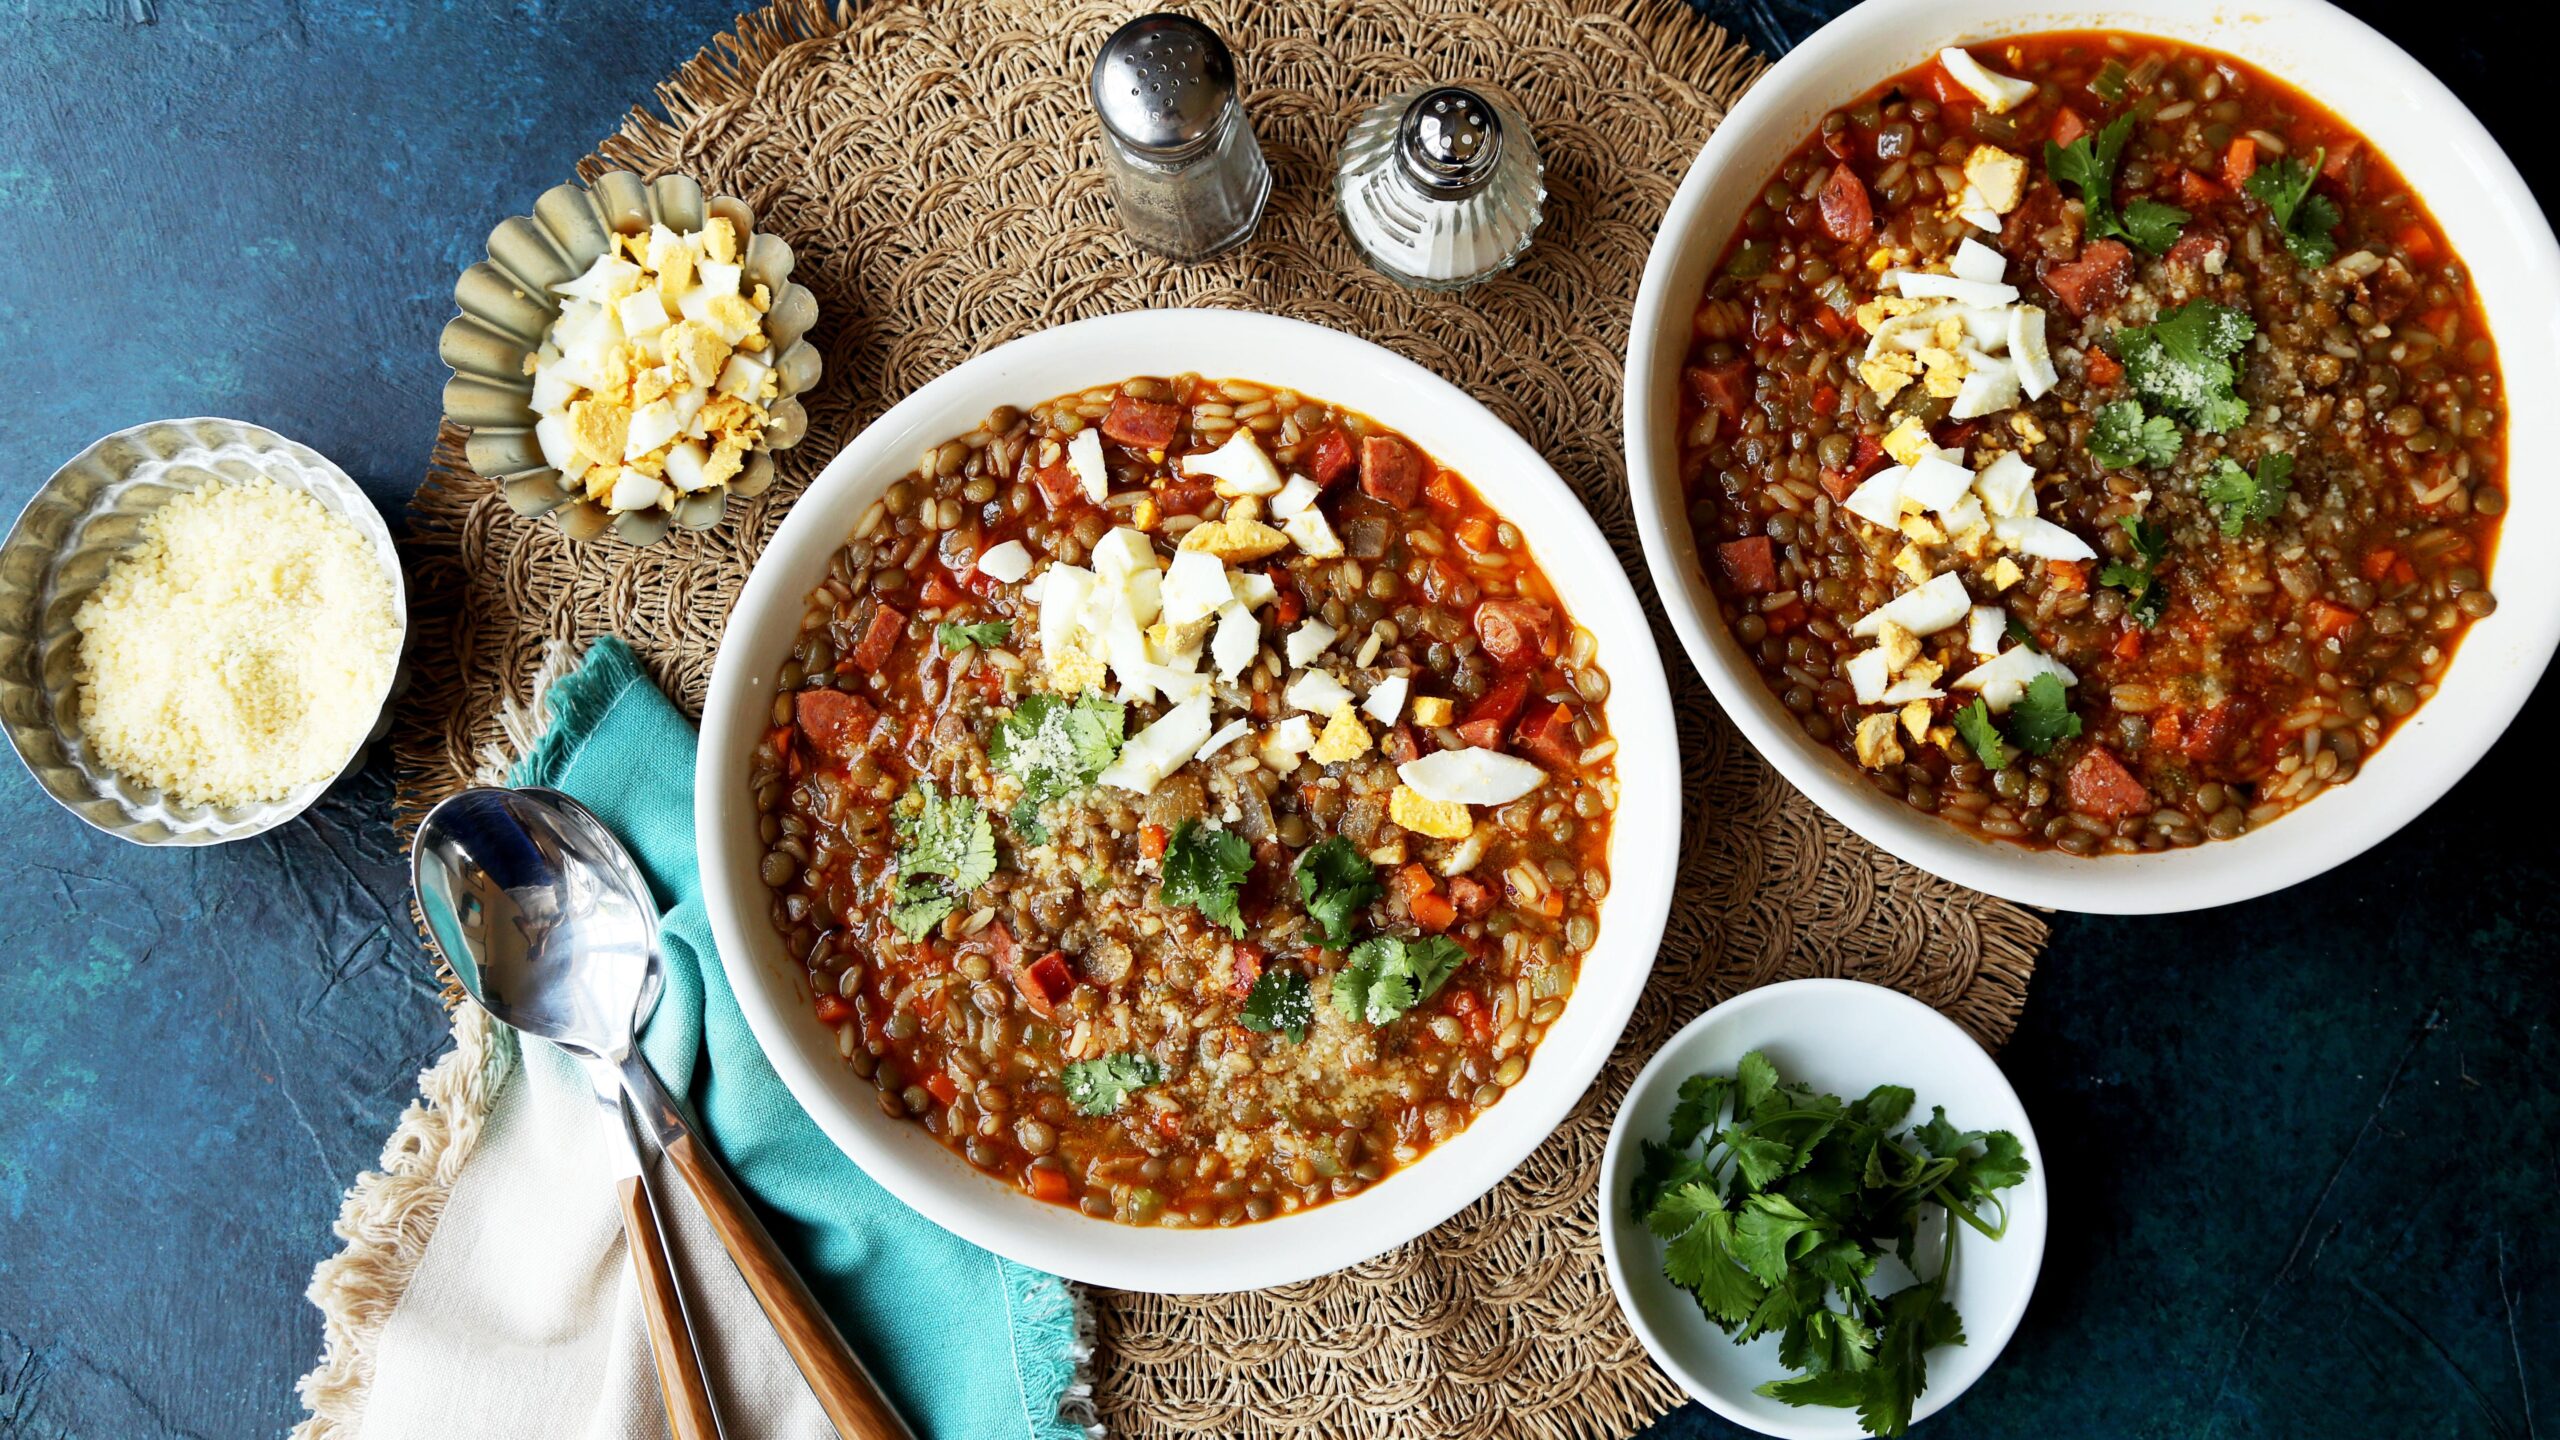  The sizzling chorizo is the perfect partner for this hearty lentil soup.